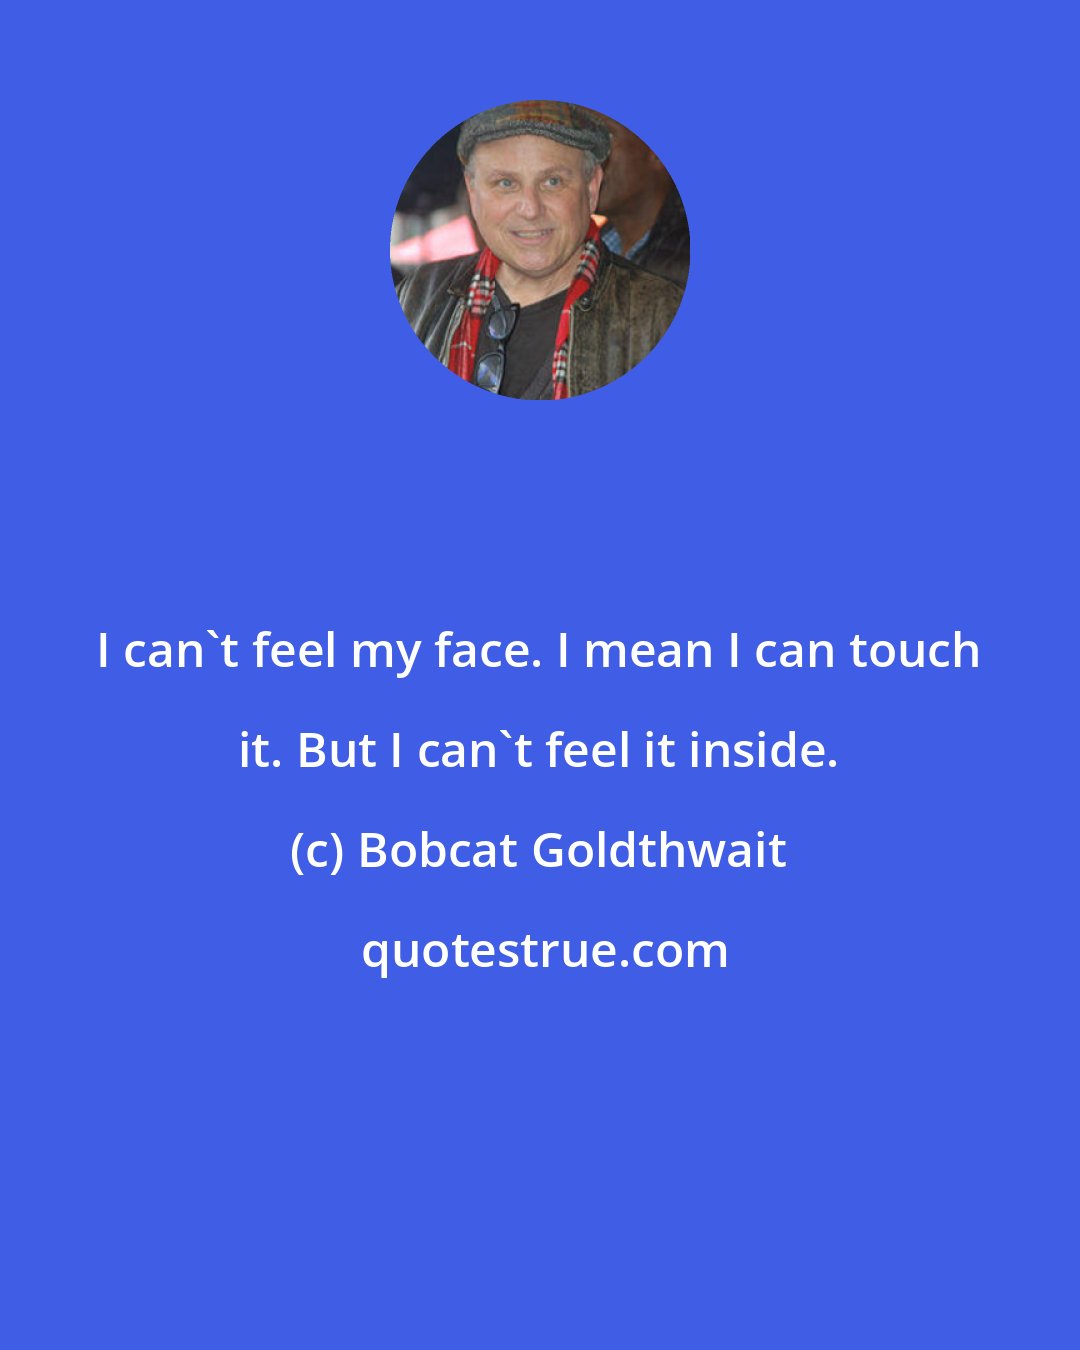 Bobcat Goldthwait: I can't feel my face. I mean I can touch it. But I can't feel it inside.